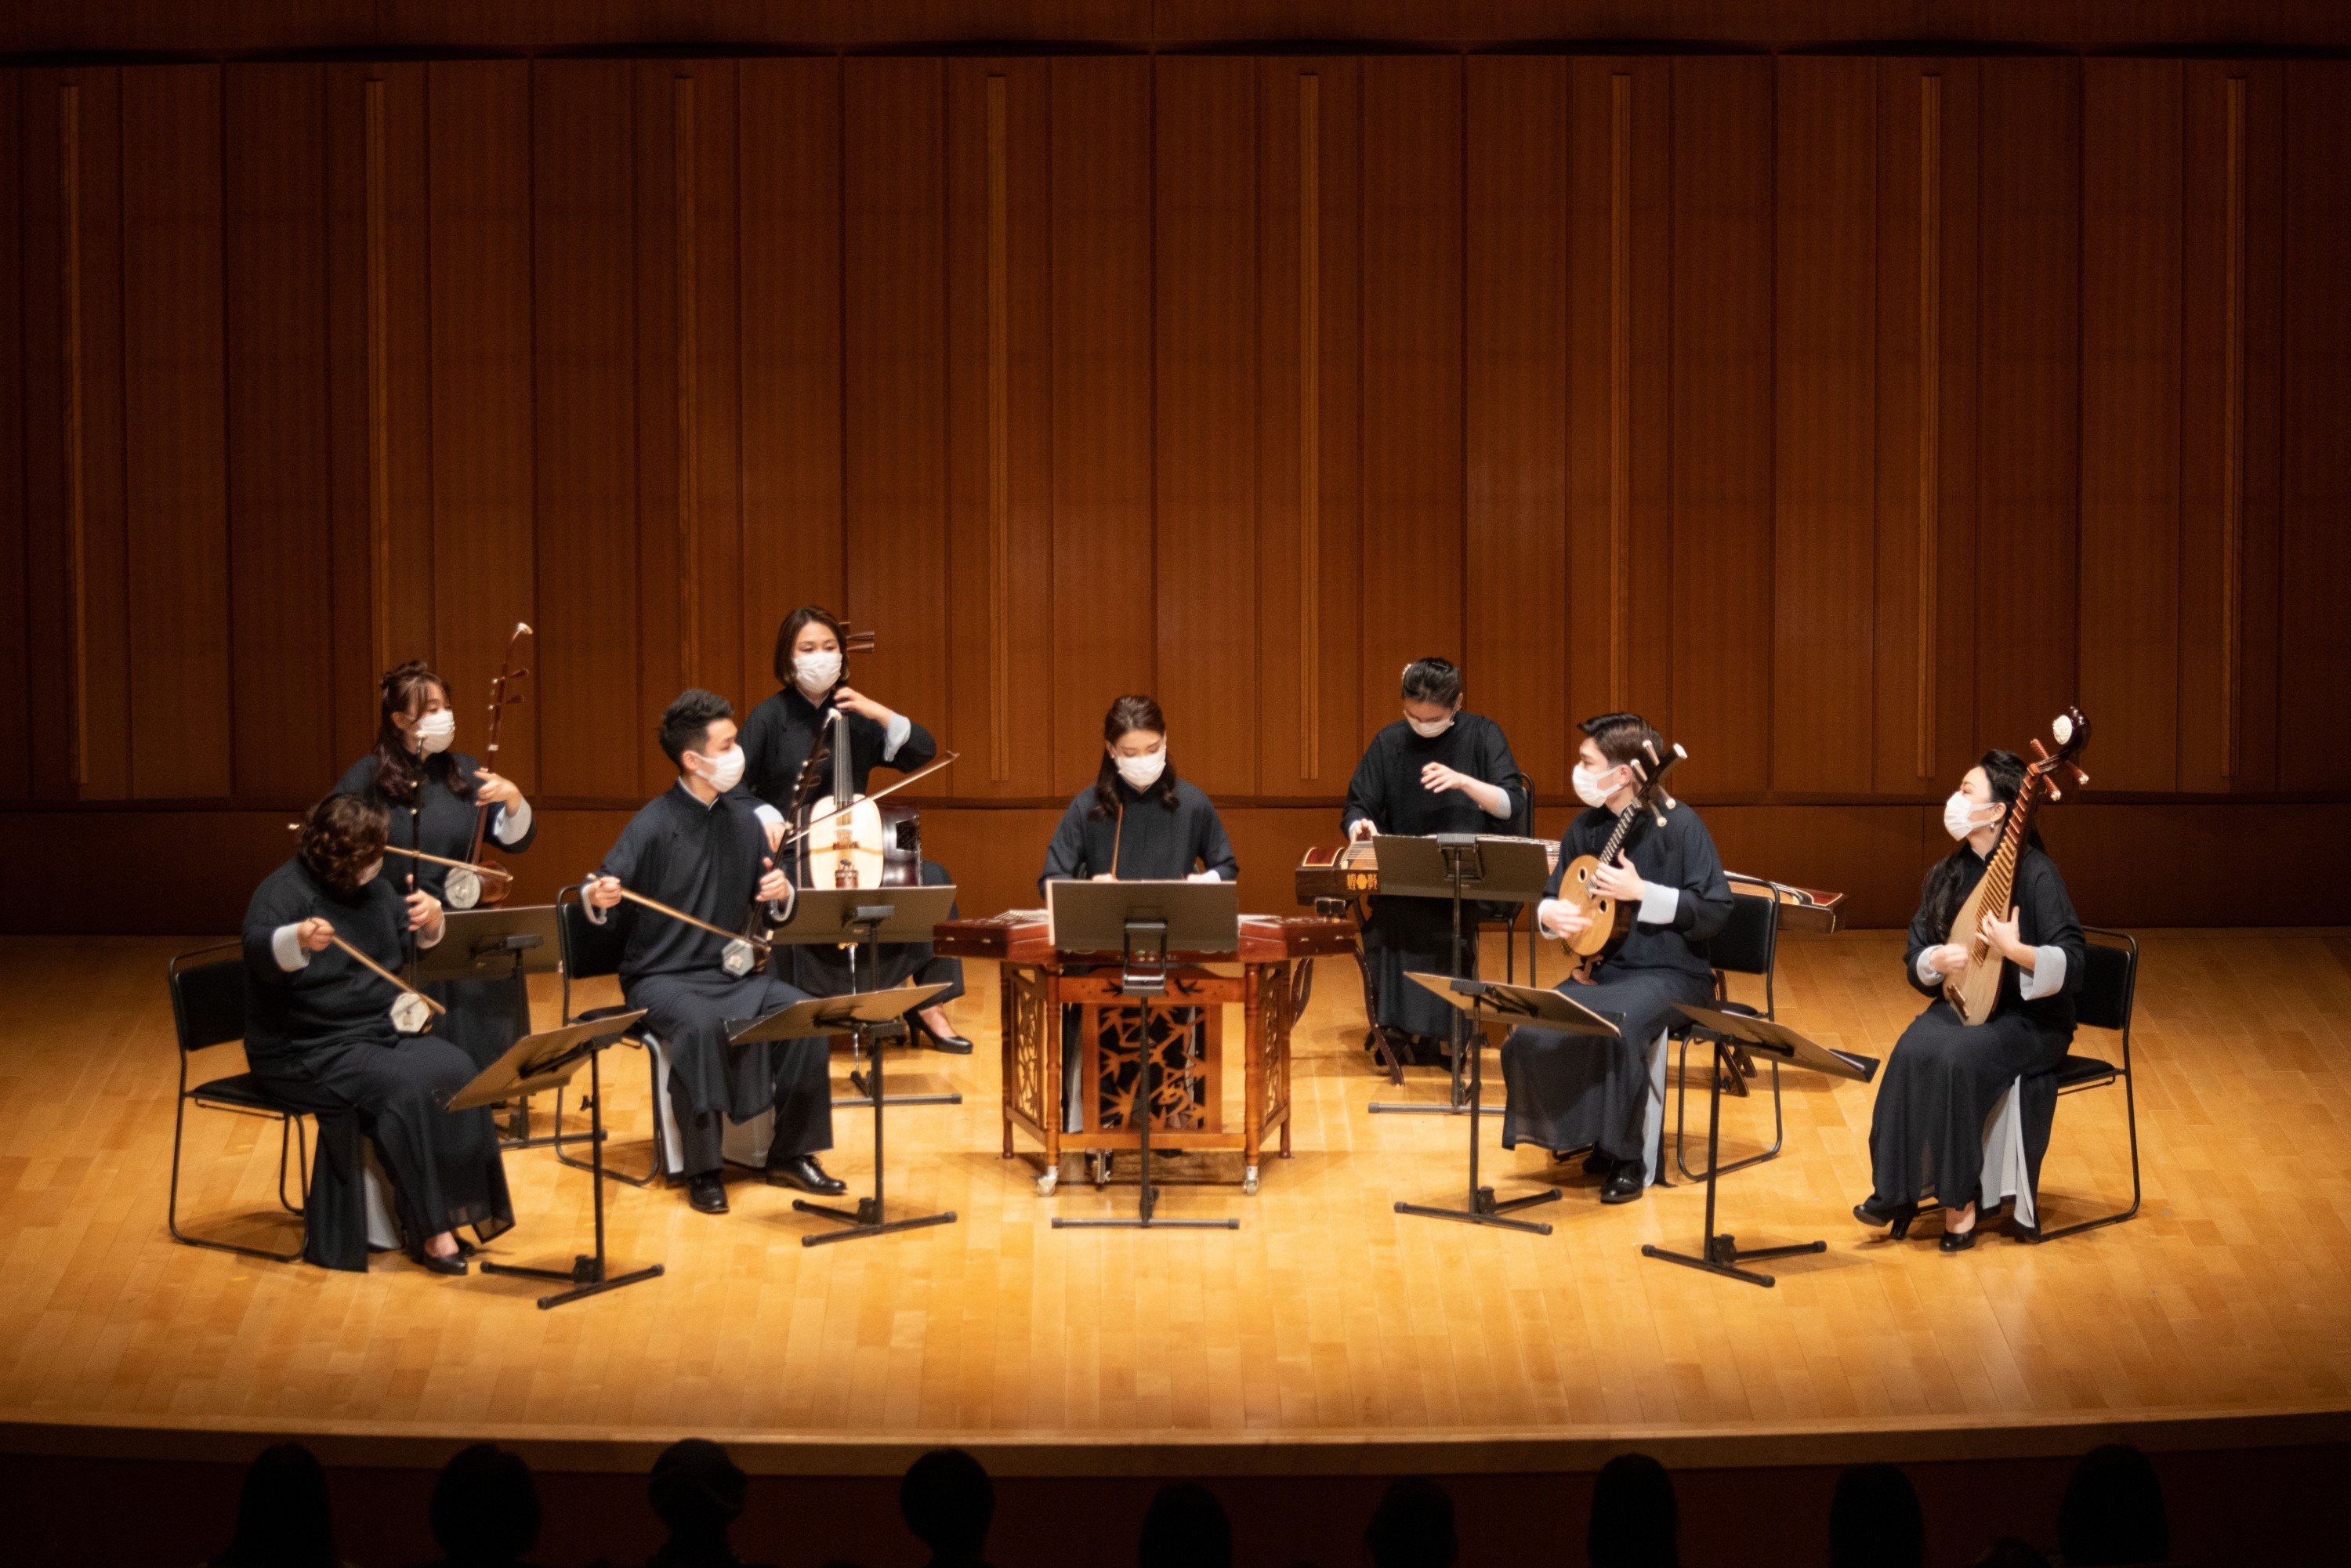 An ensemble of players from the Hong Kong China Orchestra was the first performing arts group from Hong Kong to tour overseas as the Covid-19 pandemic neared its end, when they went to Osaka and Tokyo in December 2022. Photo: courtesy of Hong Kong Chinese Orchestra